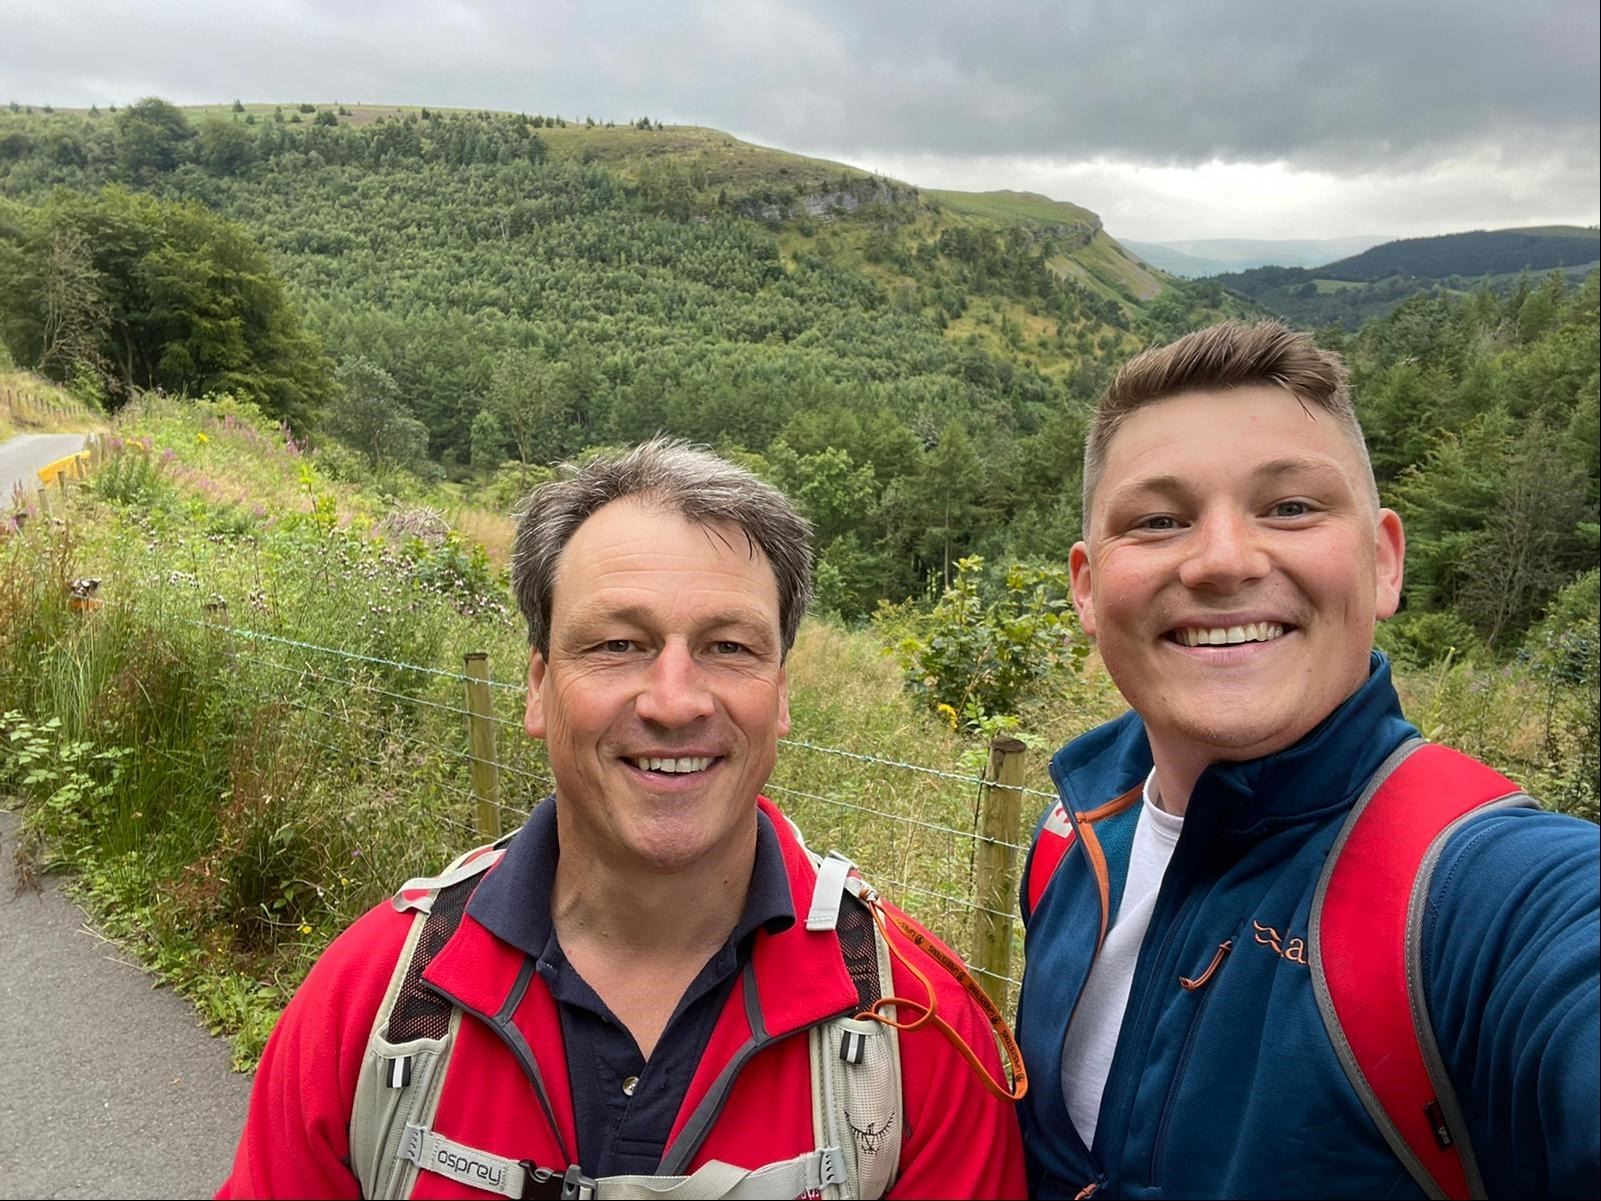 Tom Lee and his father Nigel are set to climb Mount Kilimanjaro in January.